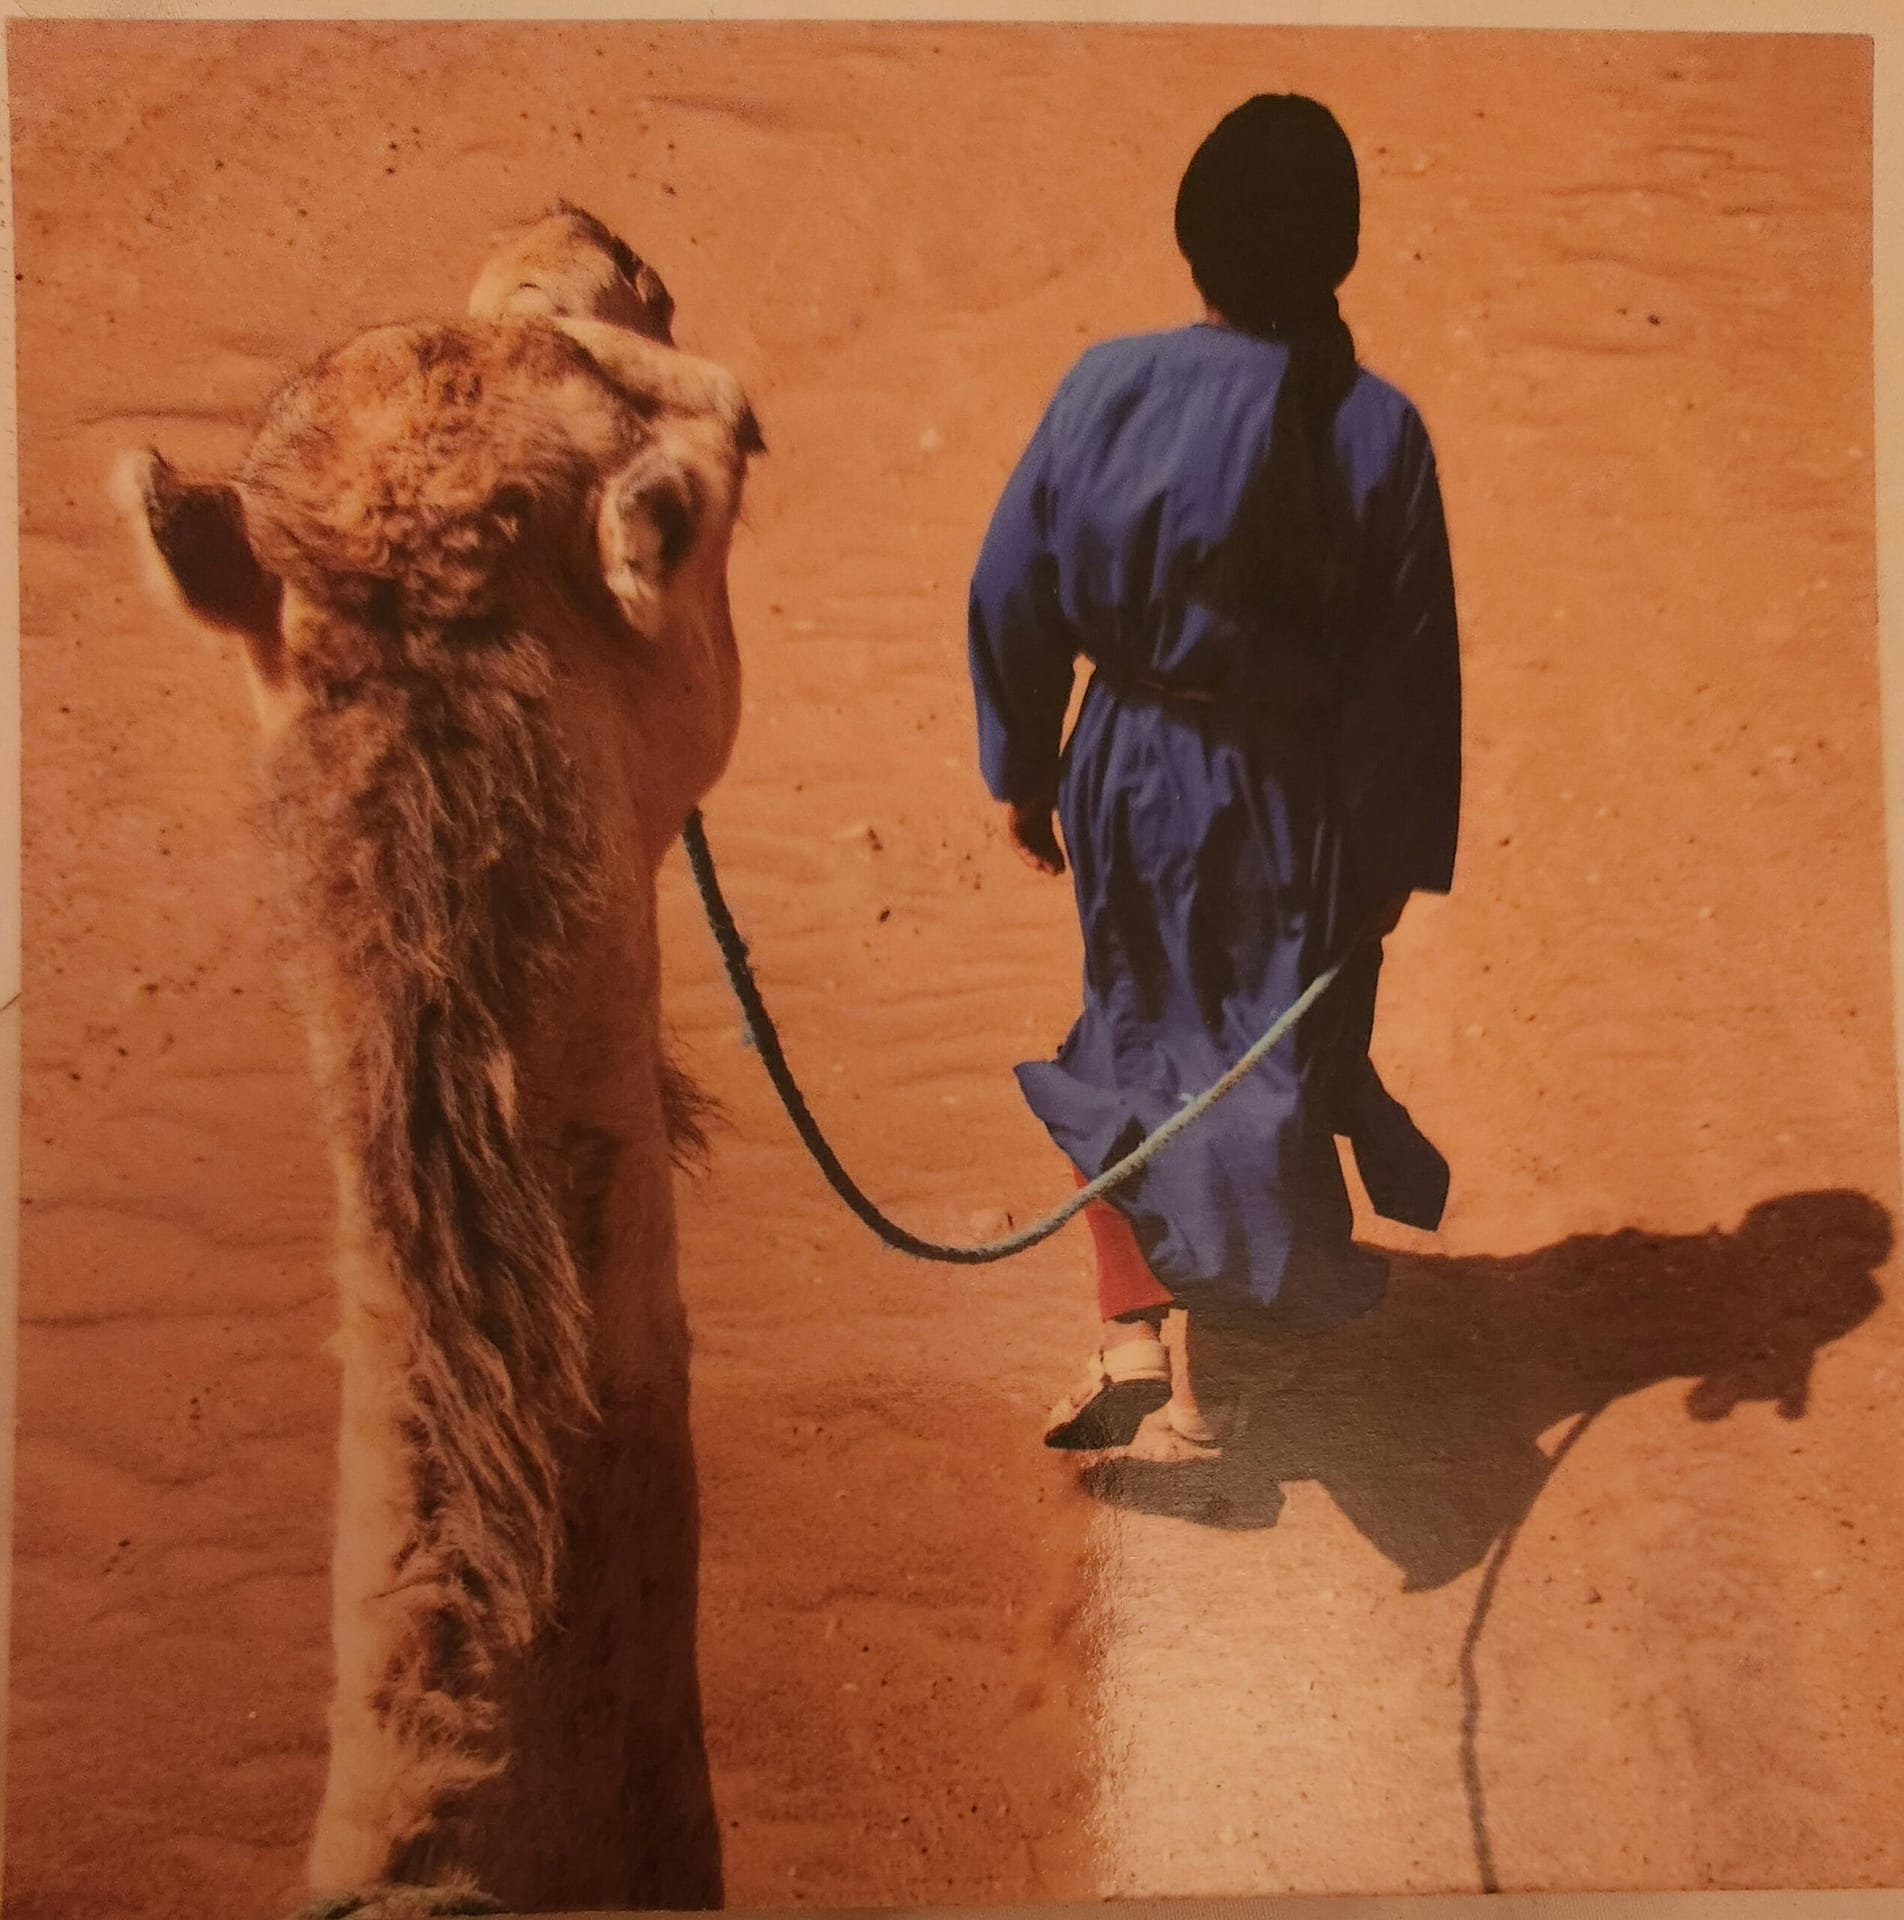 Nomad guiding a proud camel in the Sahara Desert